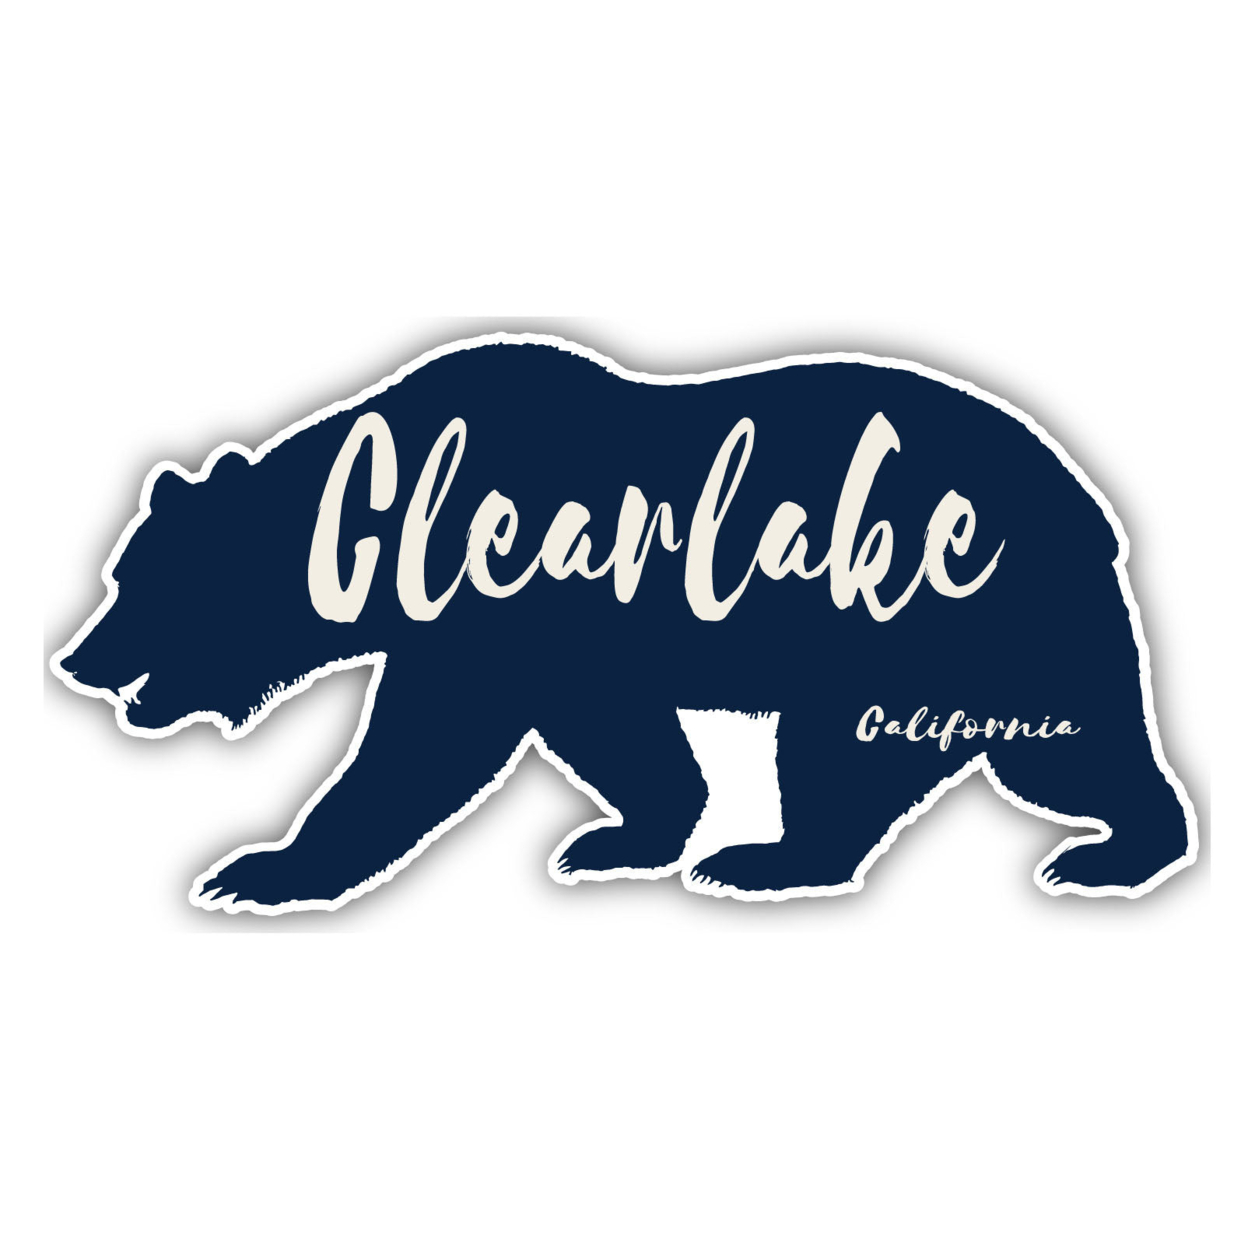 Clearlake California Souvenir Decorative Stickers (Choose Theme And Size) - Single Unit, 8-Inch, Camp Life